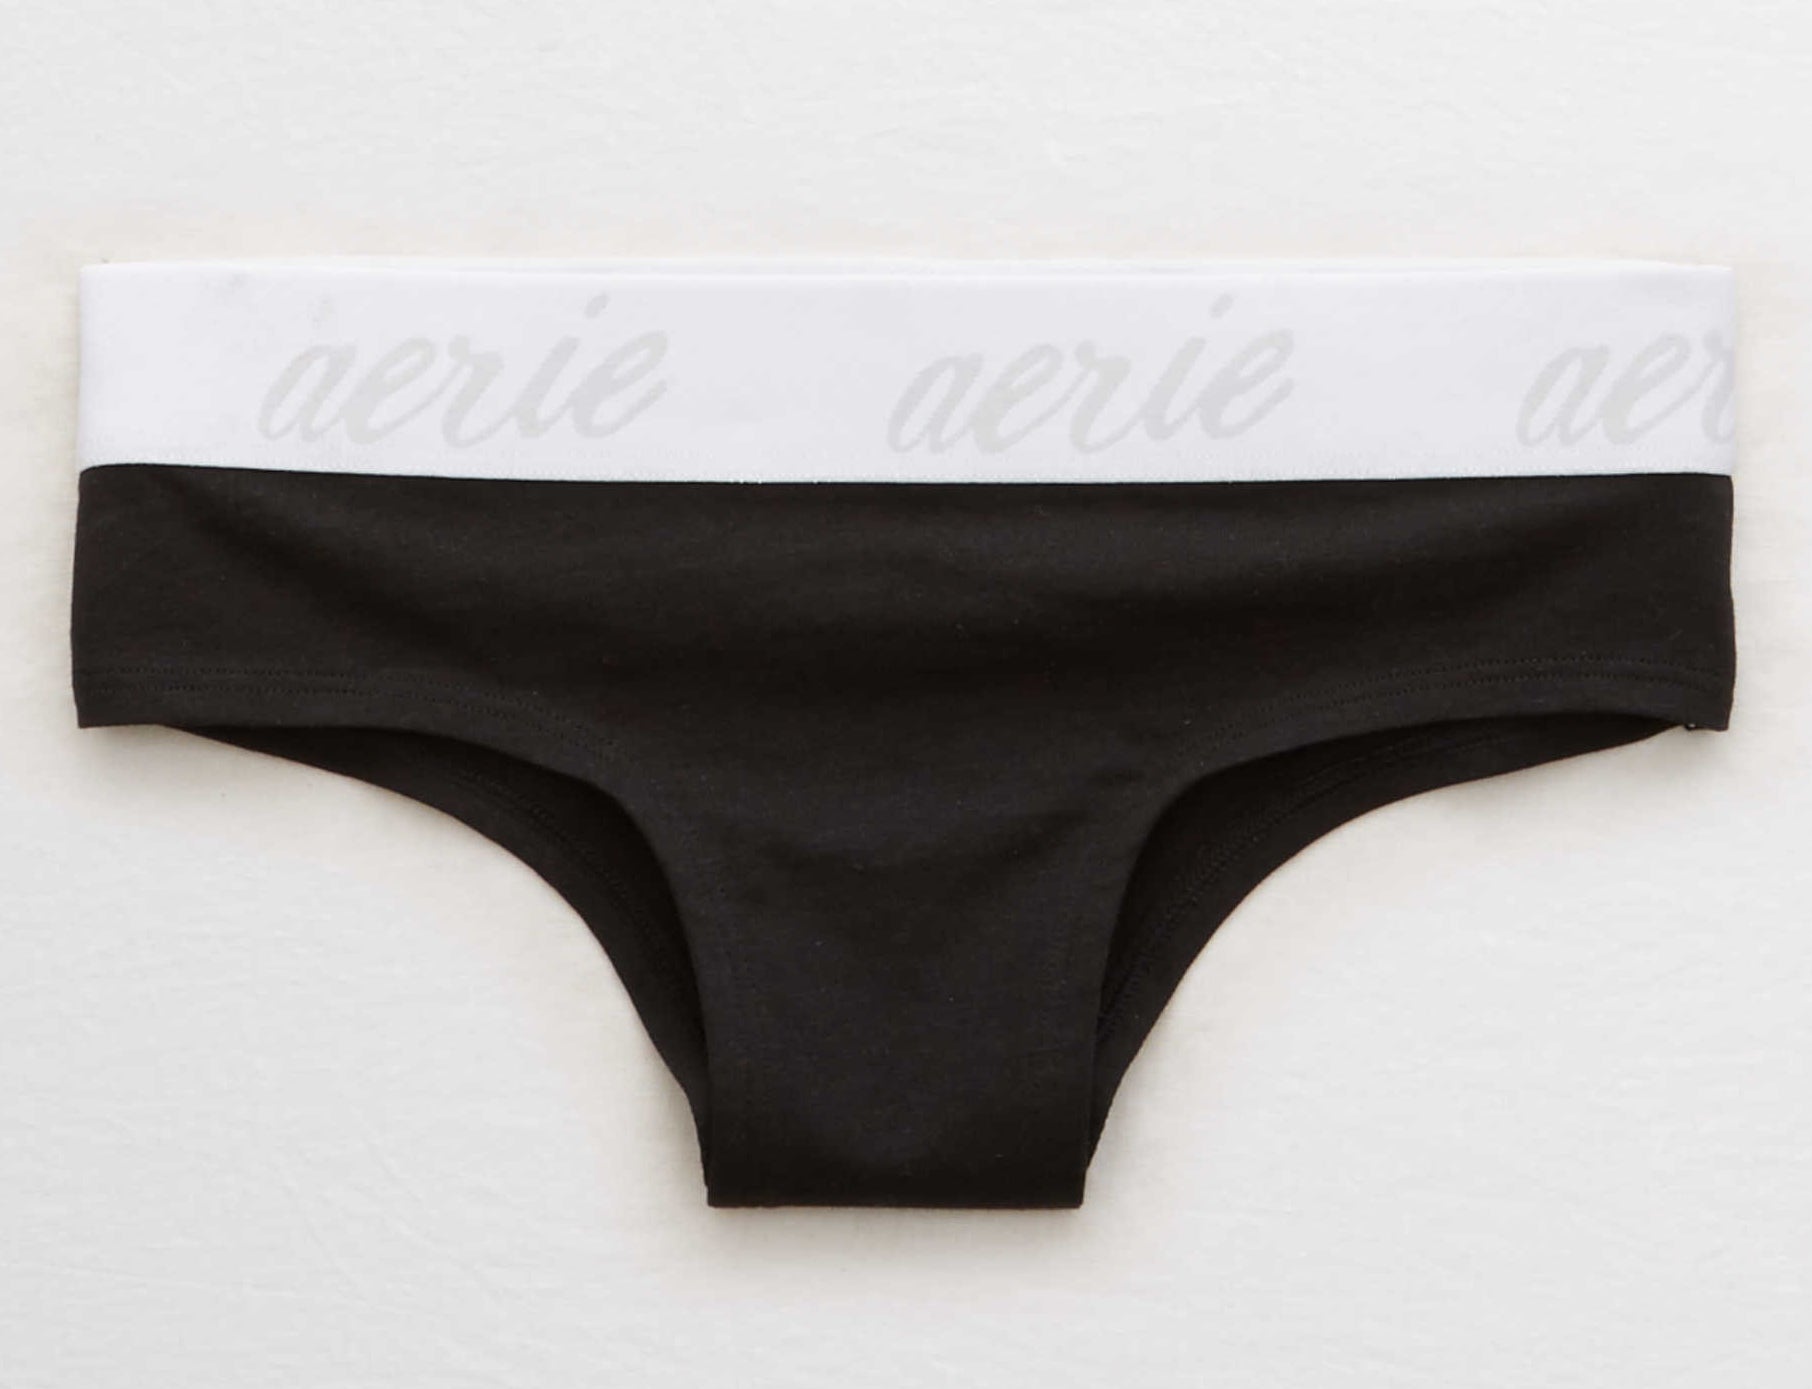 black cheeky undies with a thick white waistband reading &quot;Aerie&quot;